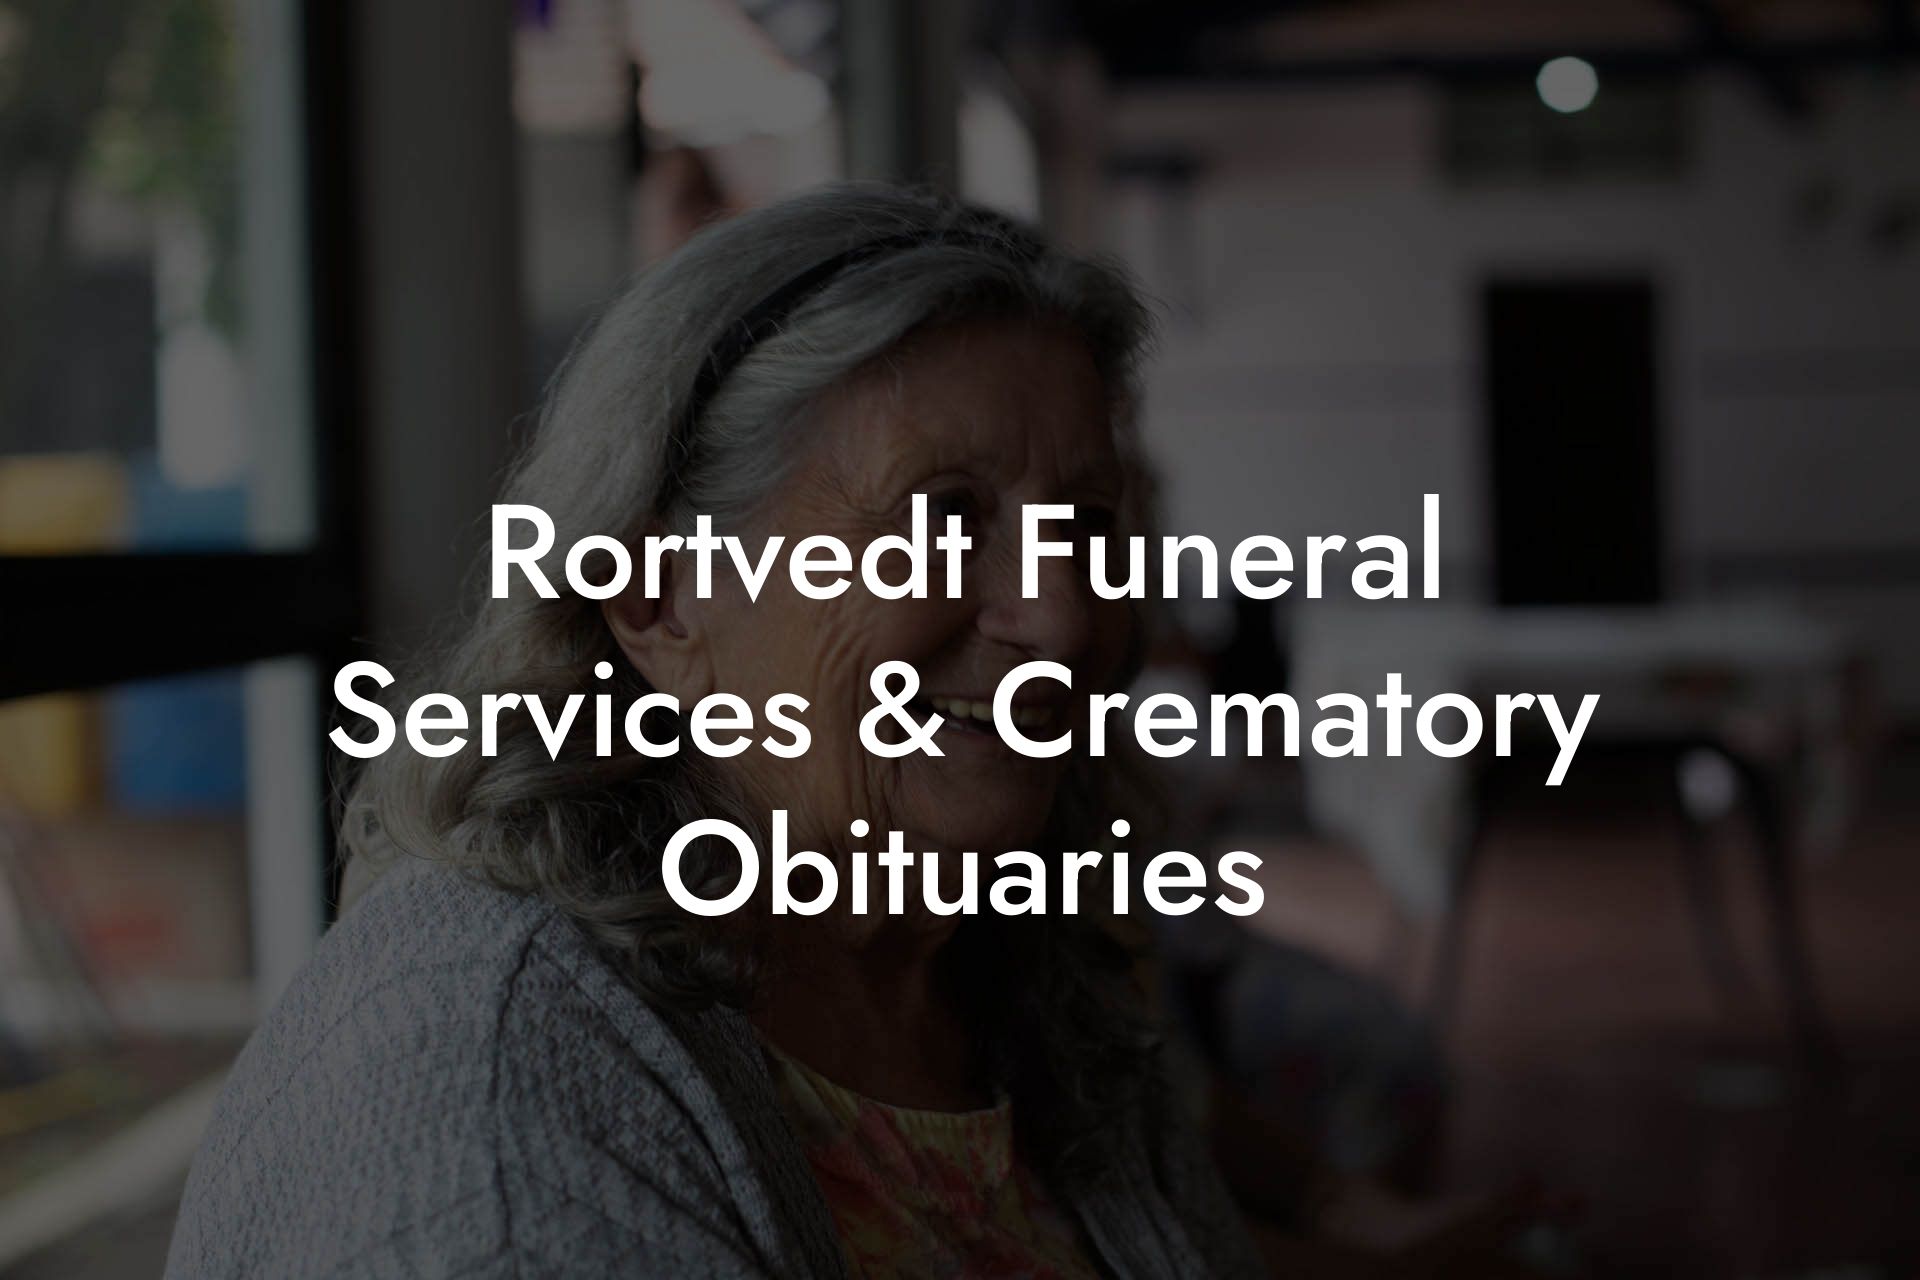 Rortvedt Funeral Services & Crematory Obituaries